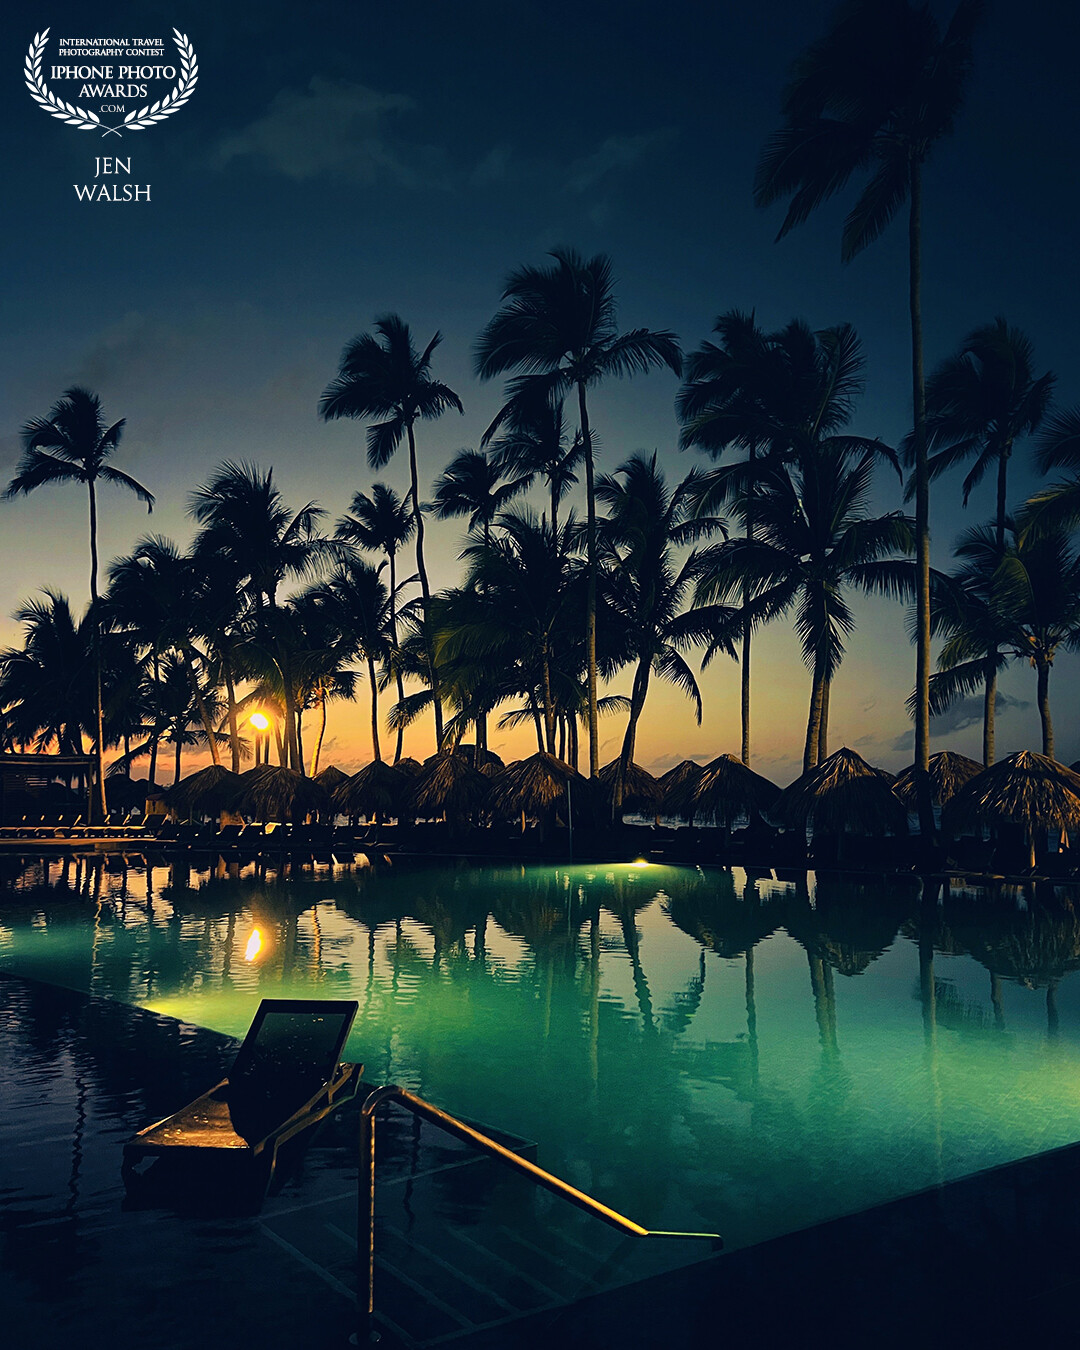 Poolside dessert and drinks on a beautifully warm, breezy, jewel-toned evening in the Dominican Republic.